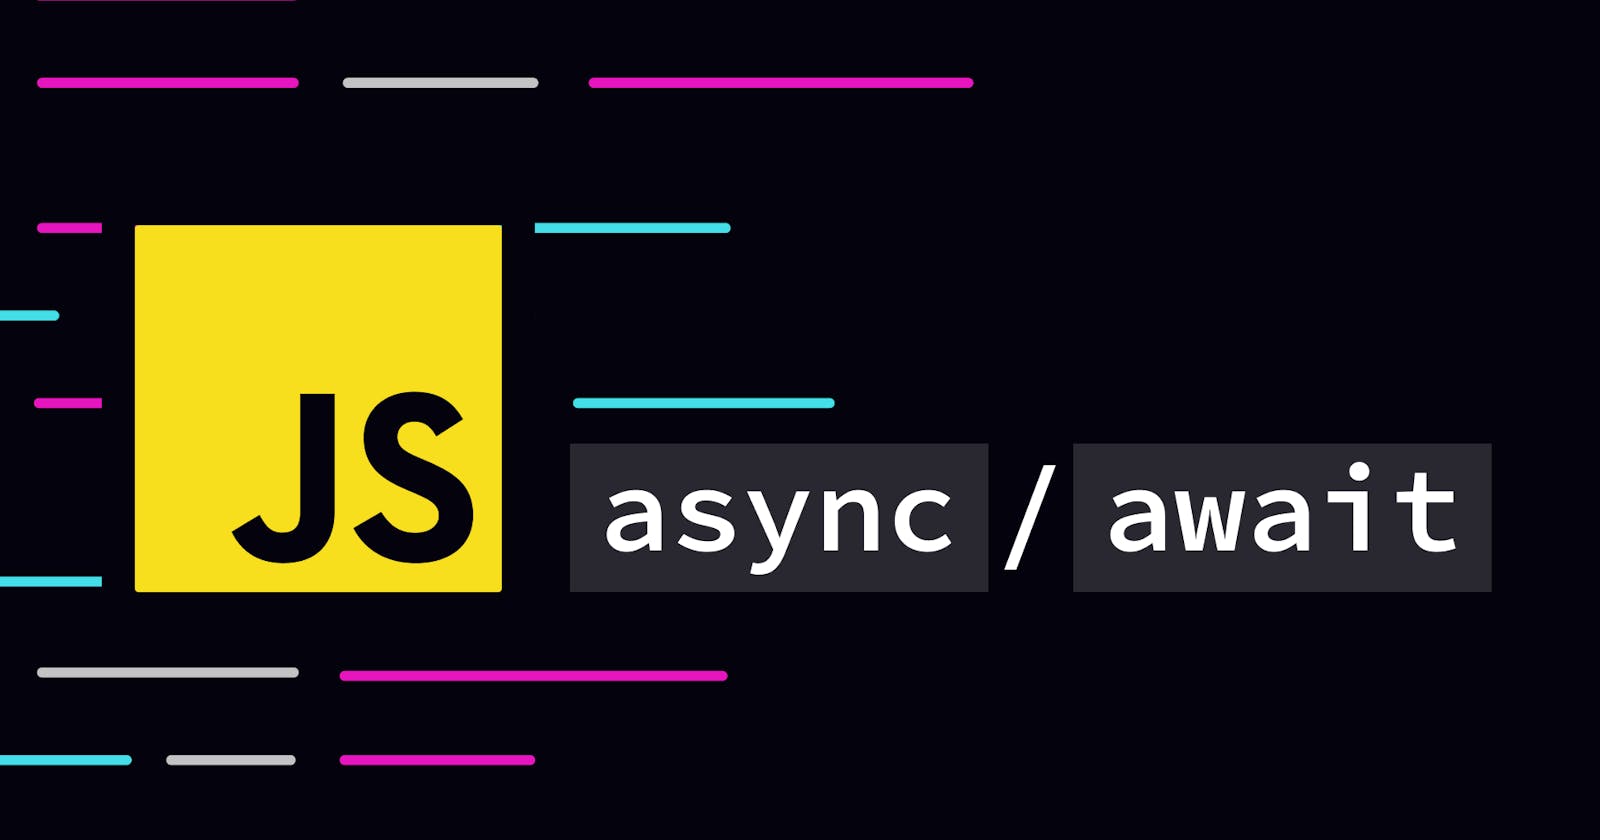 [JavaScript] Async & Await - When to Use It. Explained with Examples.